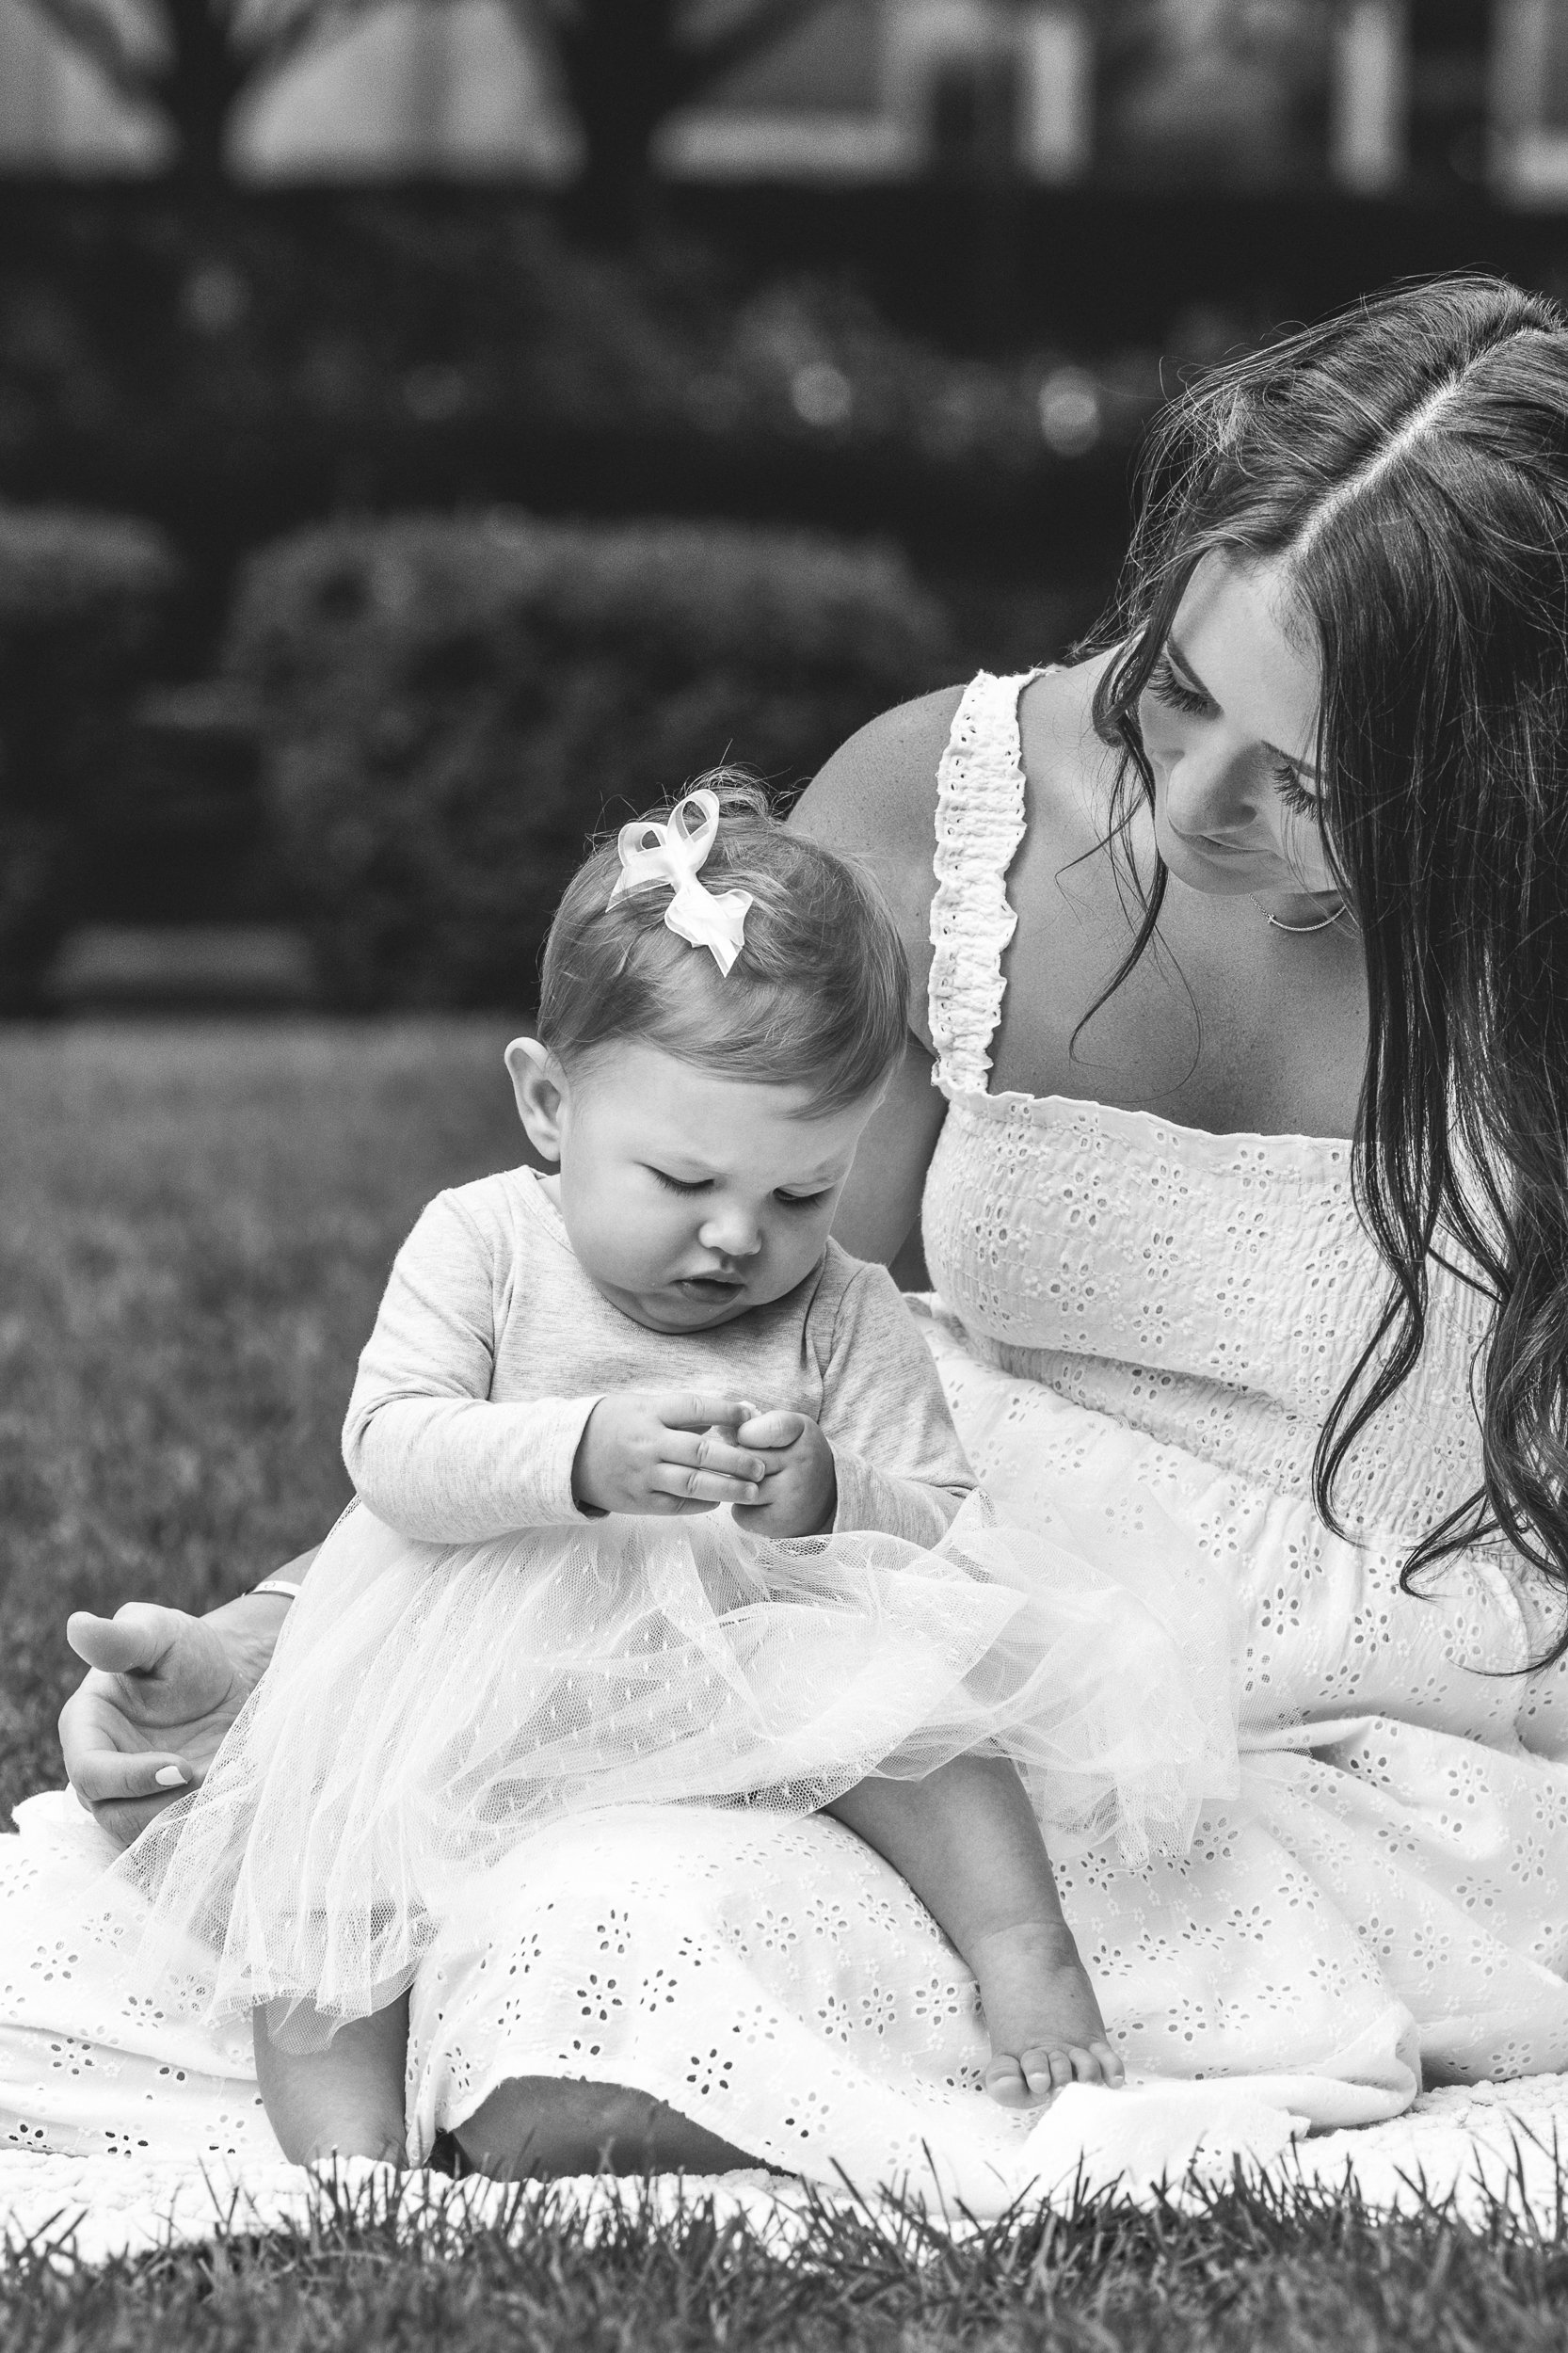  Black and white portrait of a mother and daughter on a picnic blanket in New Jersey by Nicole Hawkins Photography. black and white mother-baby pic #nicolehawkinsphotography #newjerseyphotographers #familyphotographer #6monthportraits #NJfamilyphotos